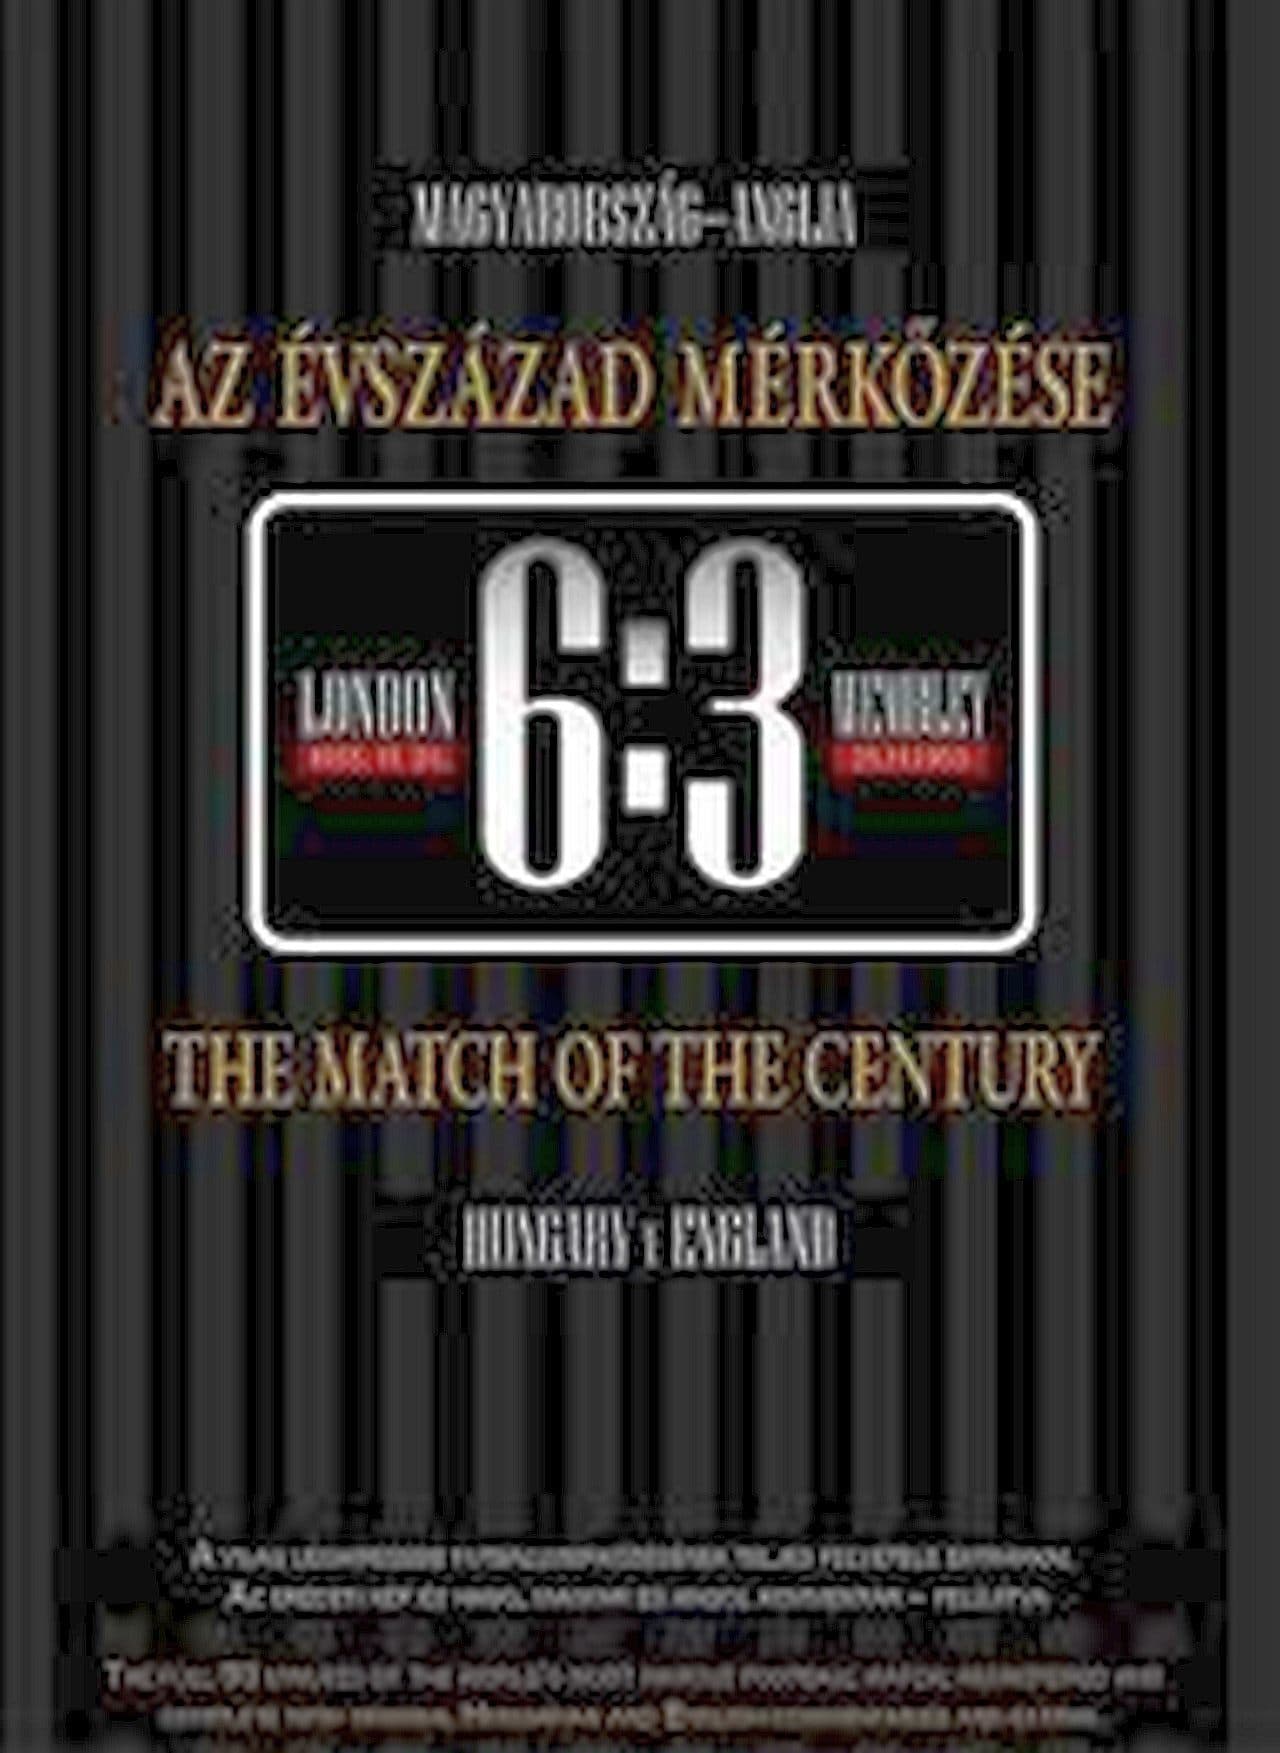 6:3 - The match of the century